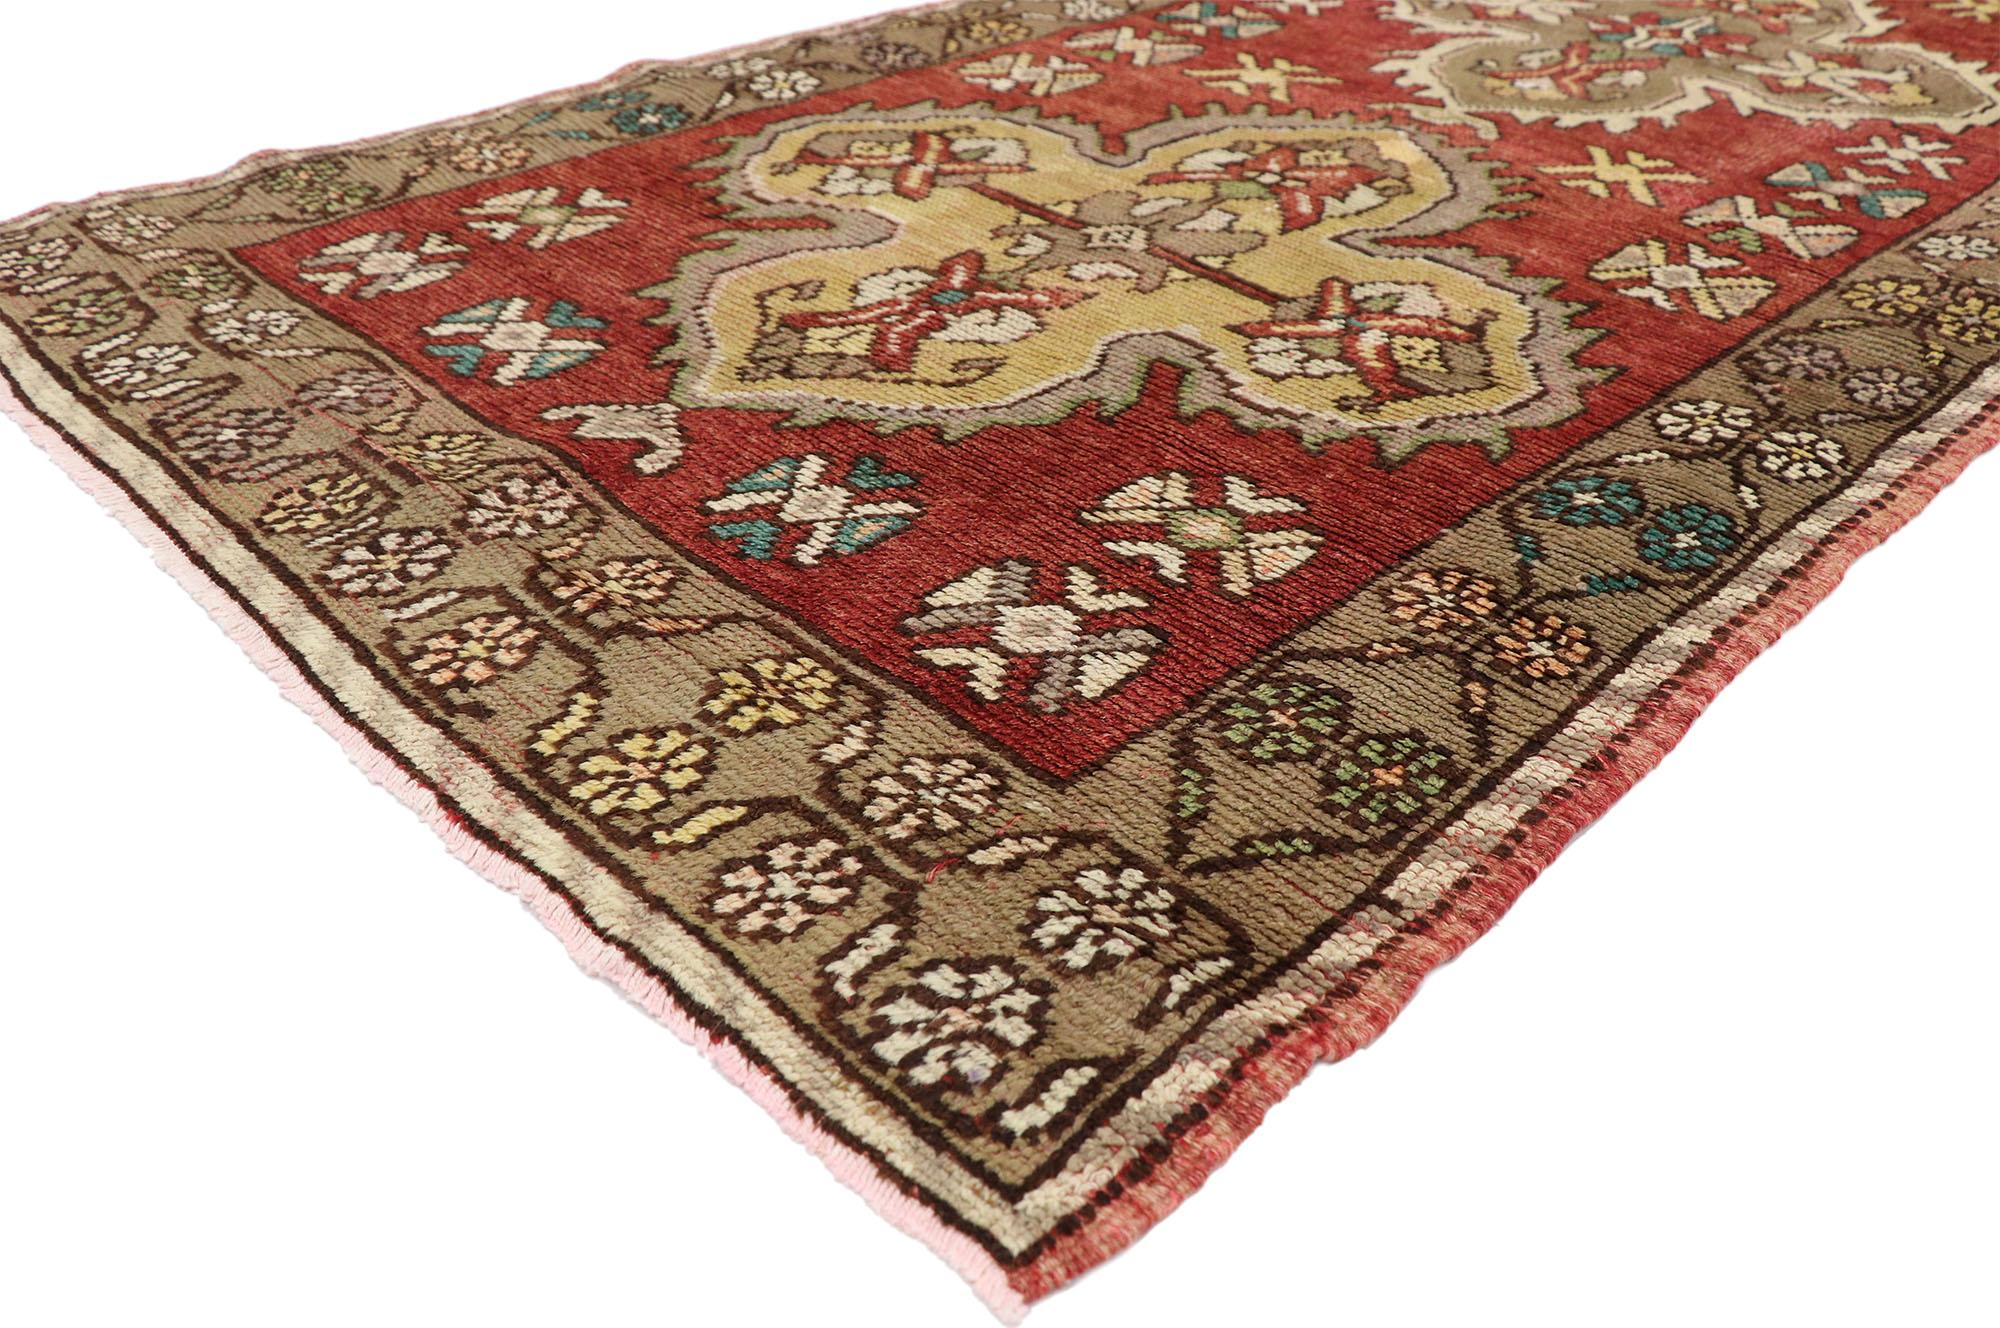 50106 Vintage Turkish Oushak Runner with Modern Traditional Style, Hallway Runner. Full of character and stately presence, this vintage Turkish Oushak carpet runner showcases an extravagant geometric design on an abrashed red field reflecting a